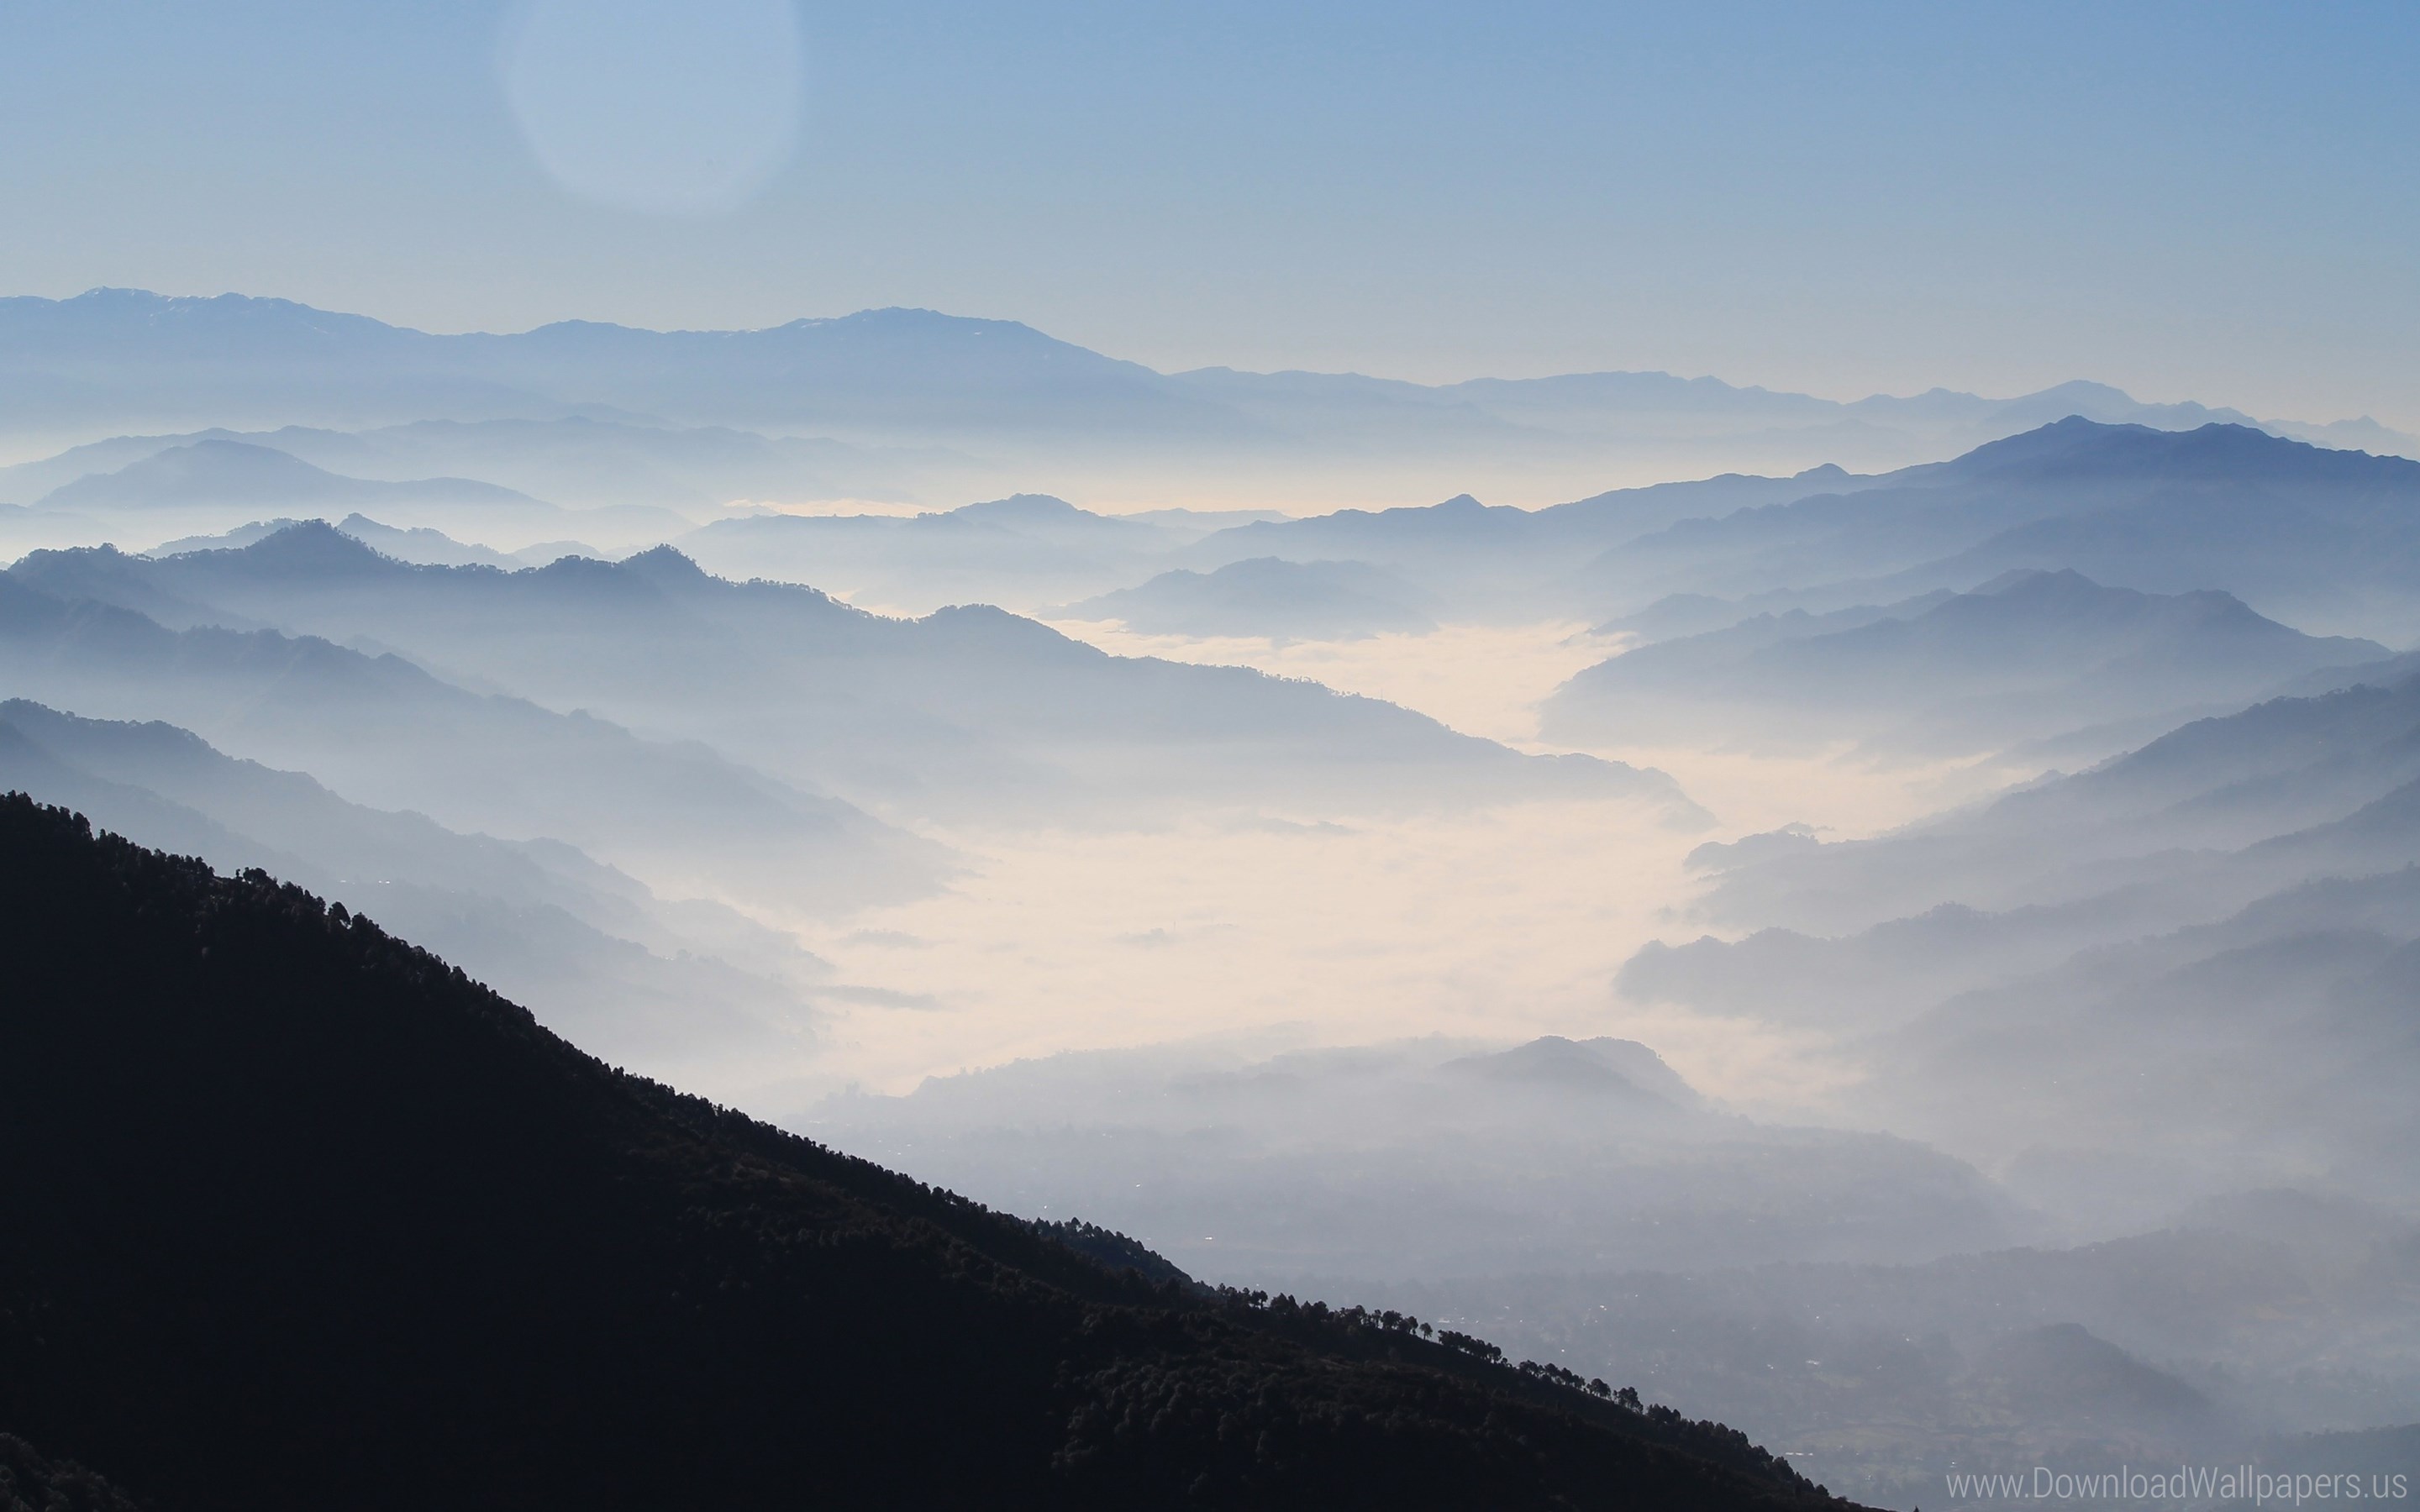 Download Retina Widescreen - Mountains With Mist , HD Wallpaper & Backgrounds